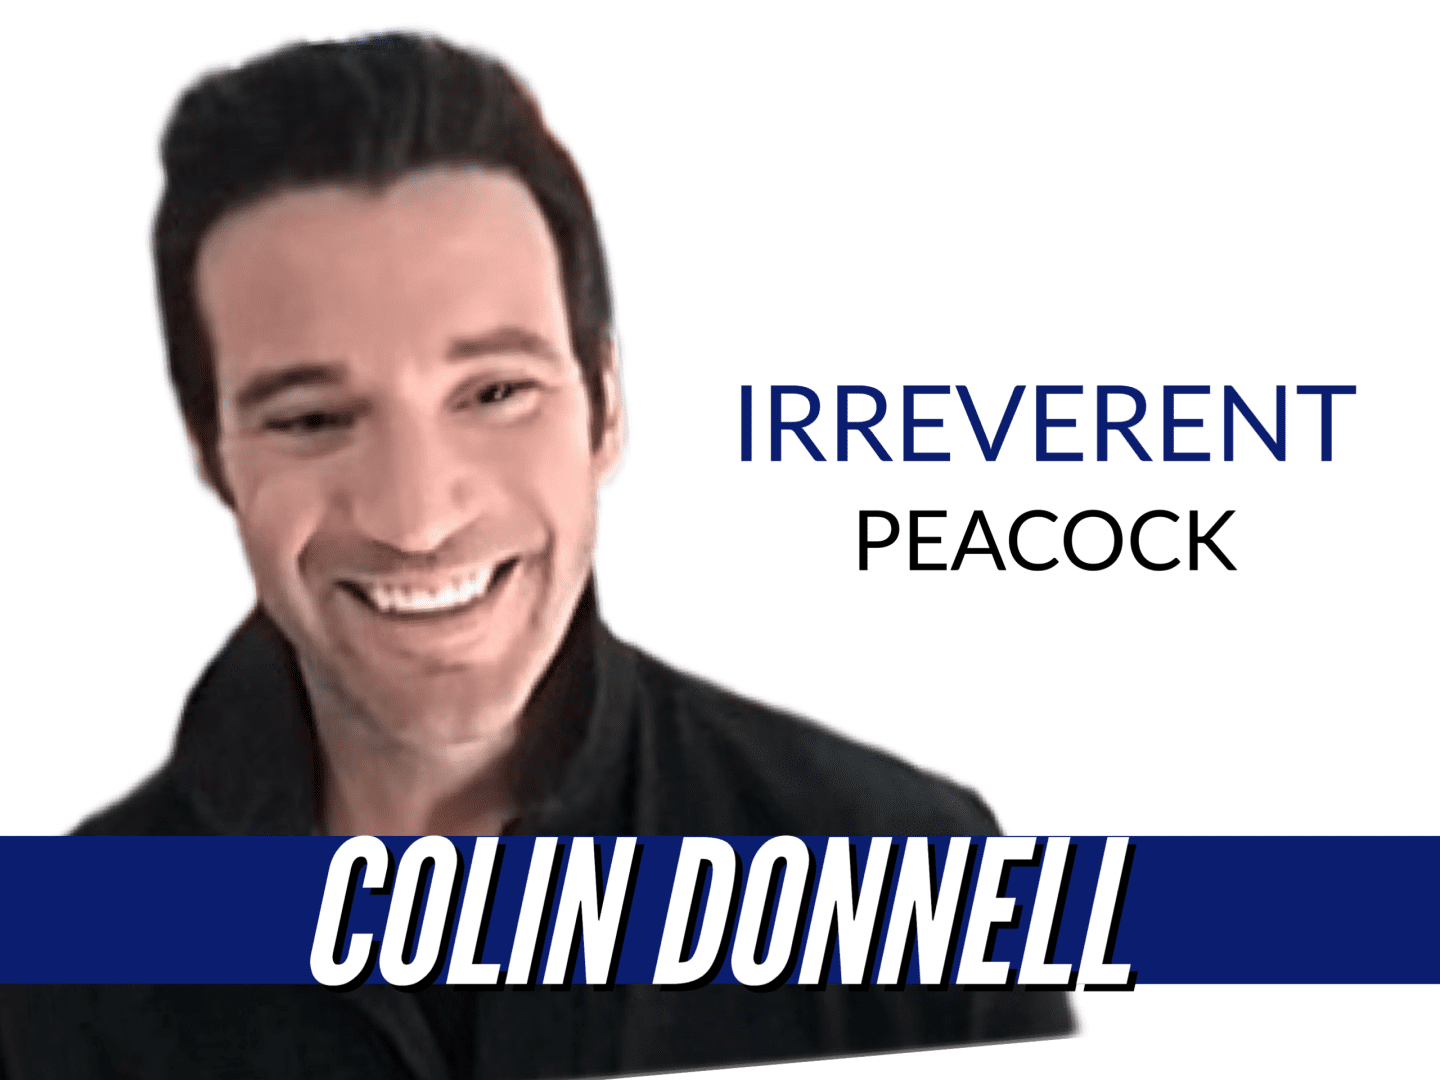 Colin Donnell stars in new Peacock series 'Irreverent'